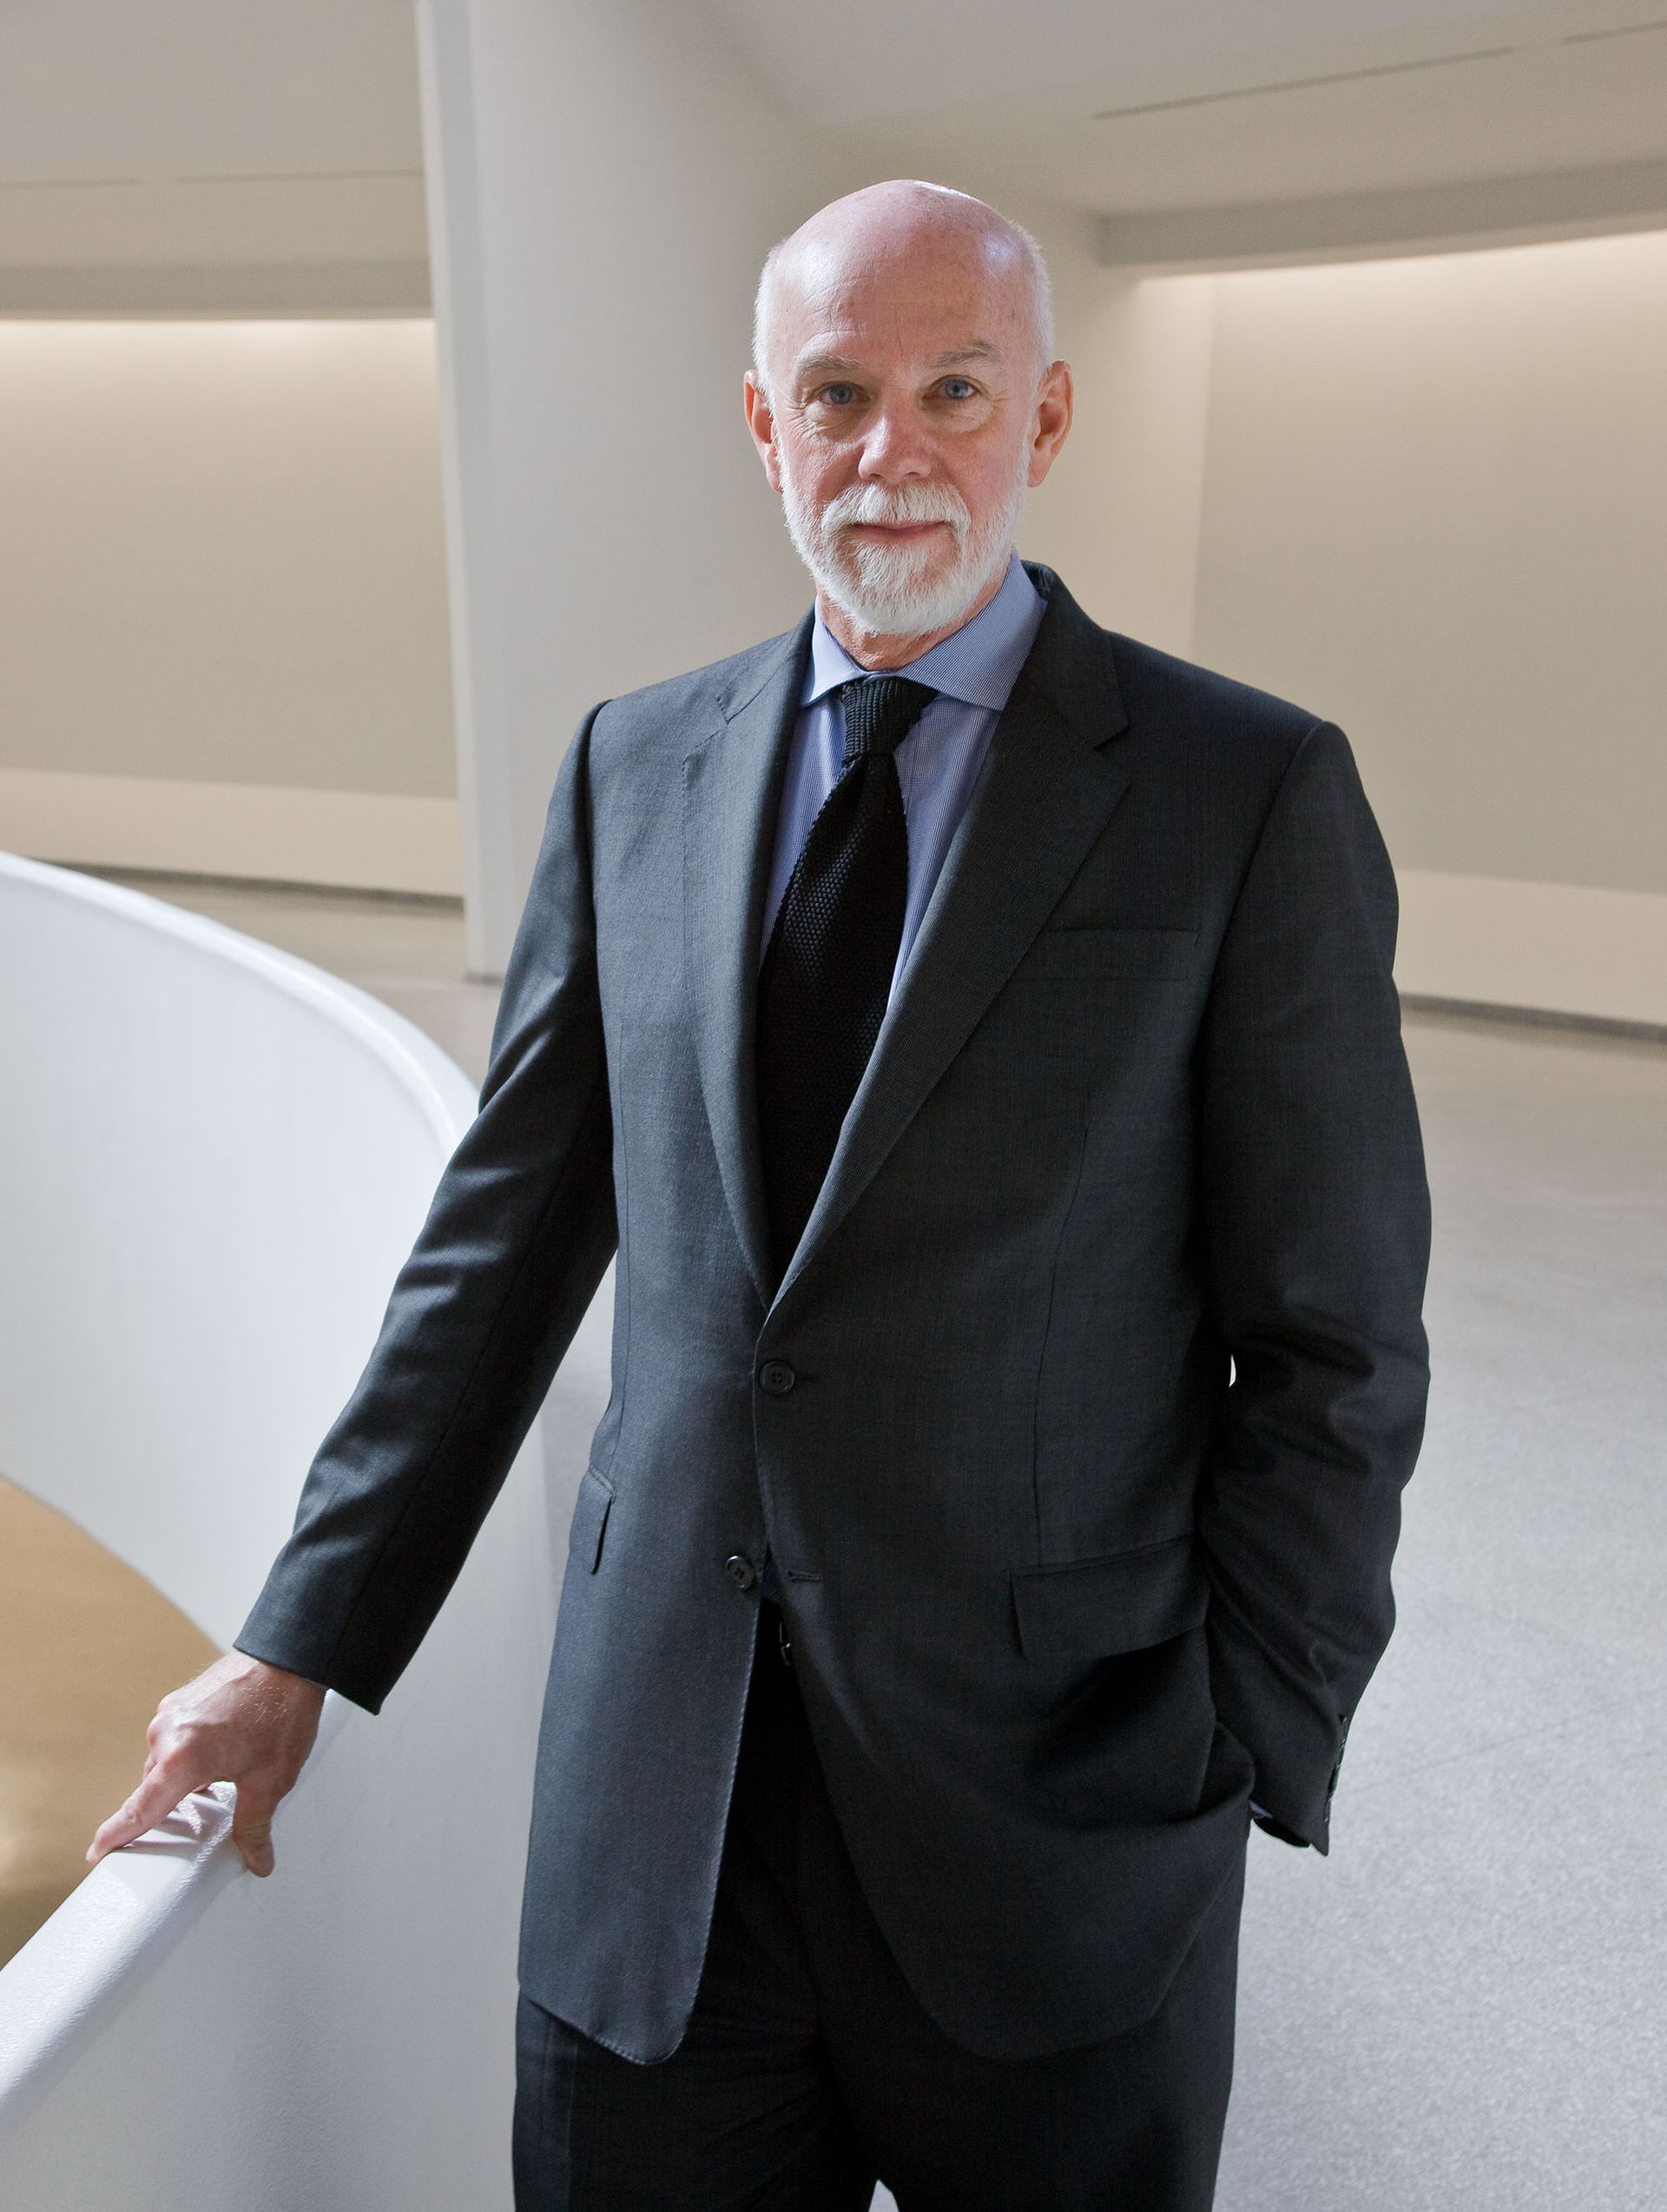 Richard Armstrong, the director of the Solomon R. Guggenheim Museum and Foundation. Photo: David Heald. © Solomon R. Guggenheim Foundation, New York.